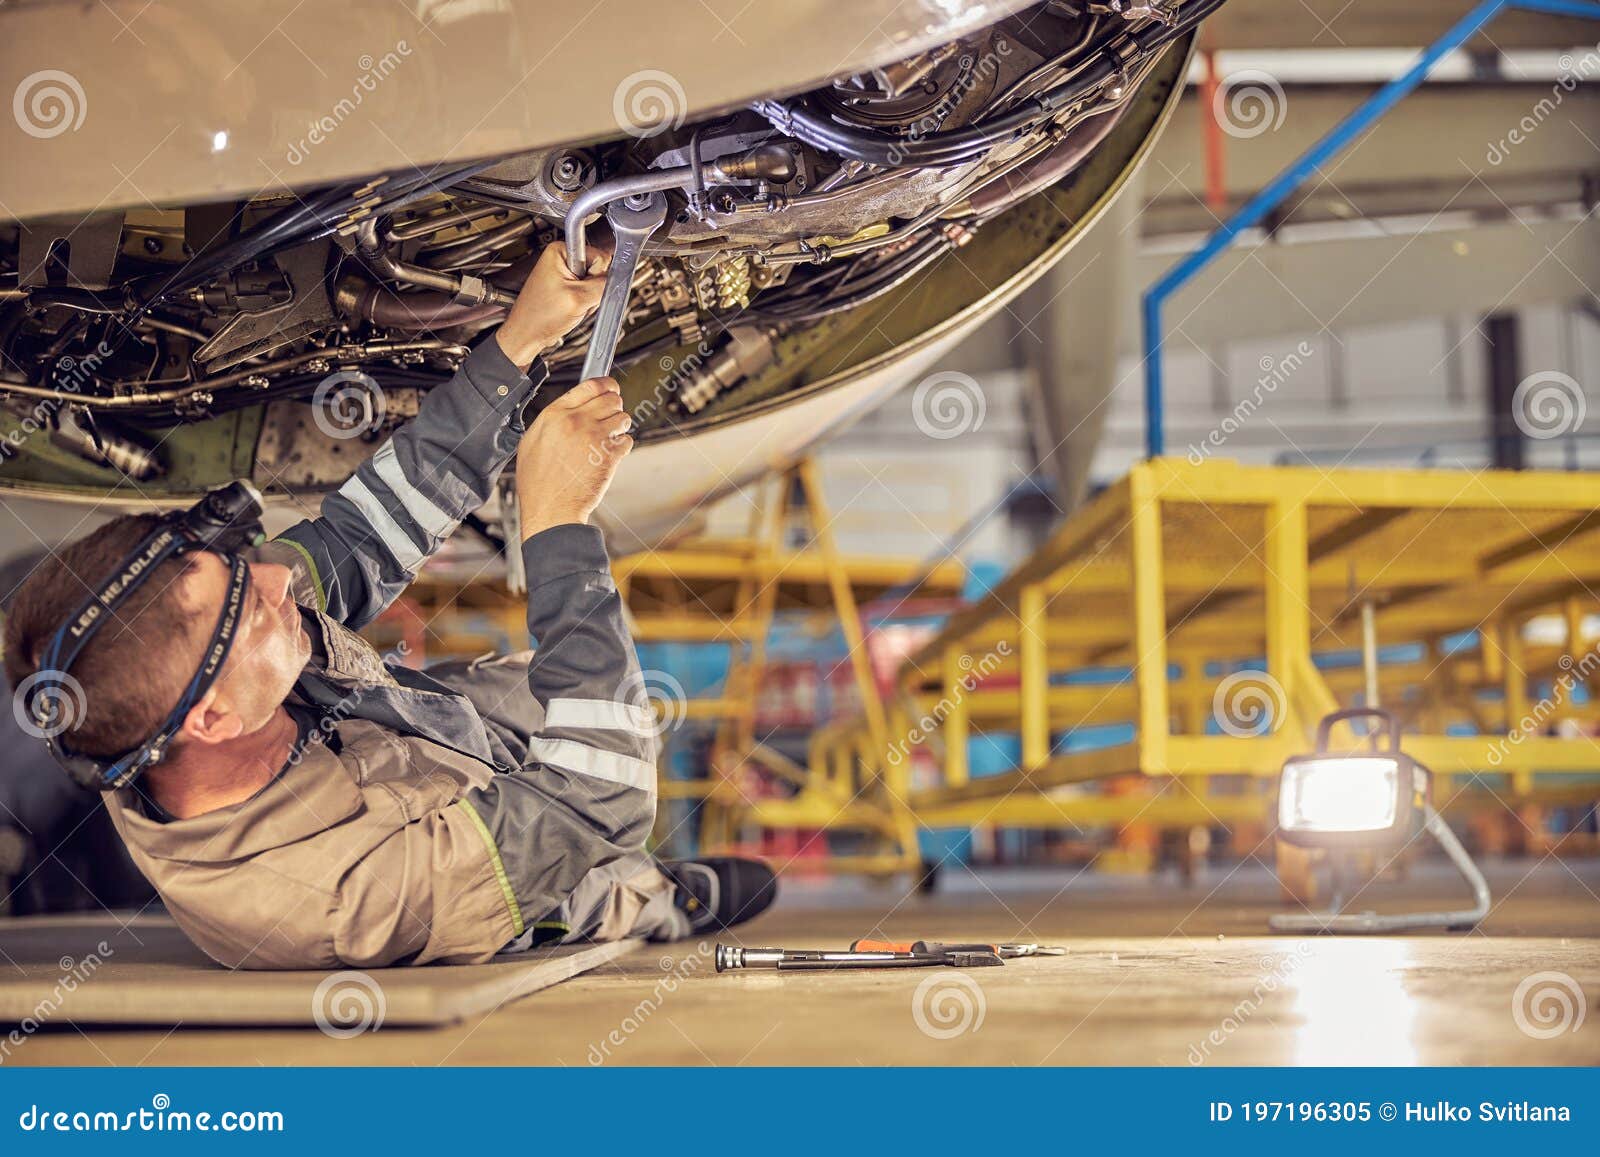 aviation mechanic is checking big jet before departure